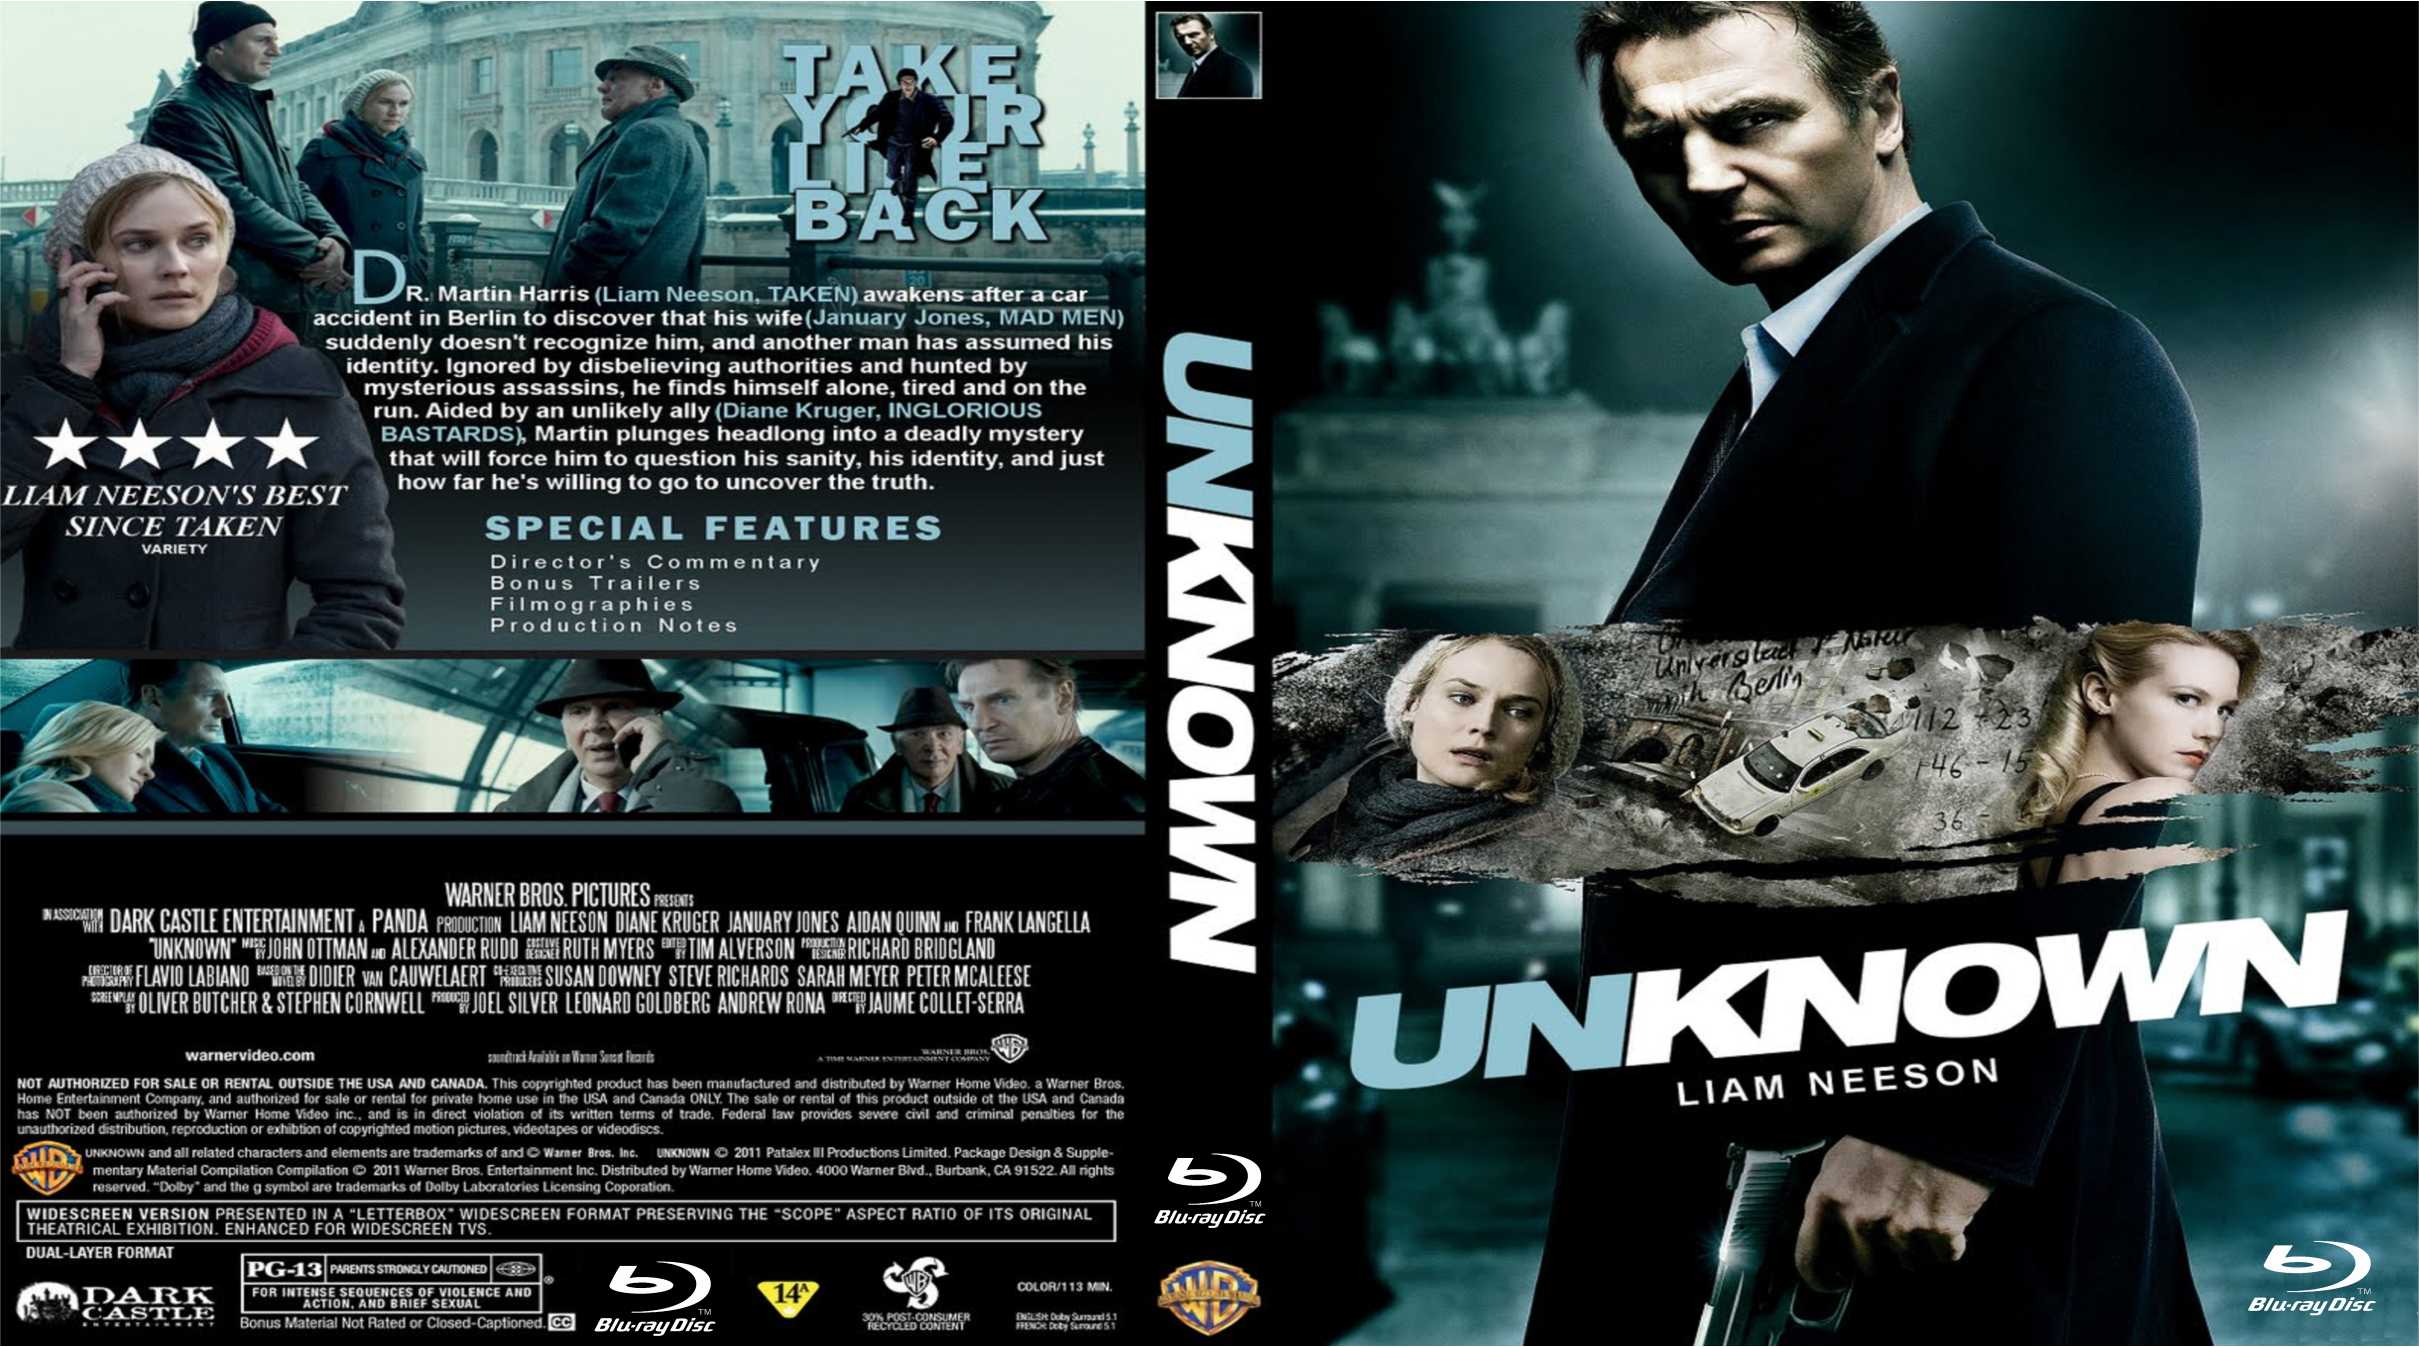 covers-box-sk-unknown-2011-bluray-high-quality-dvd-blueray-movie